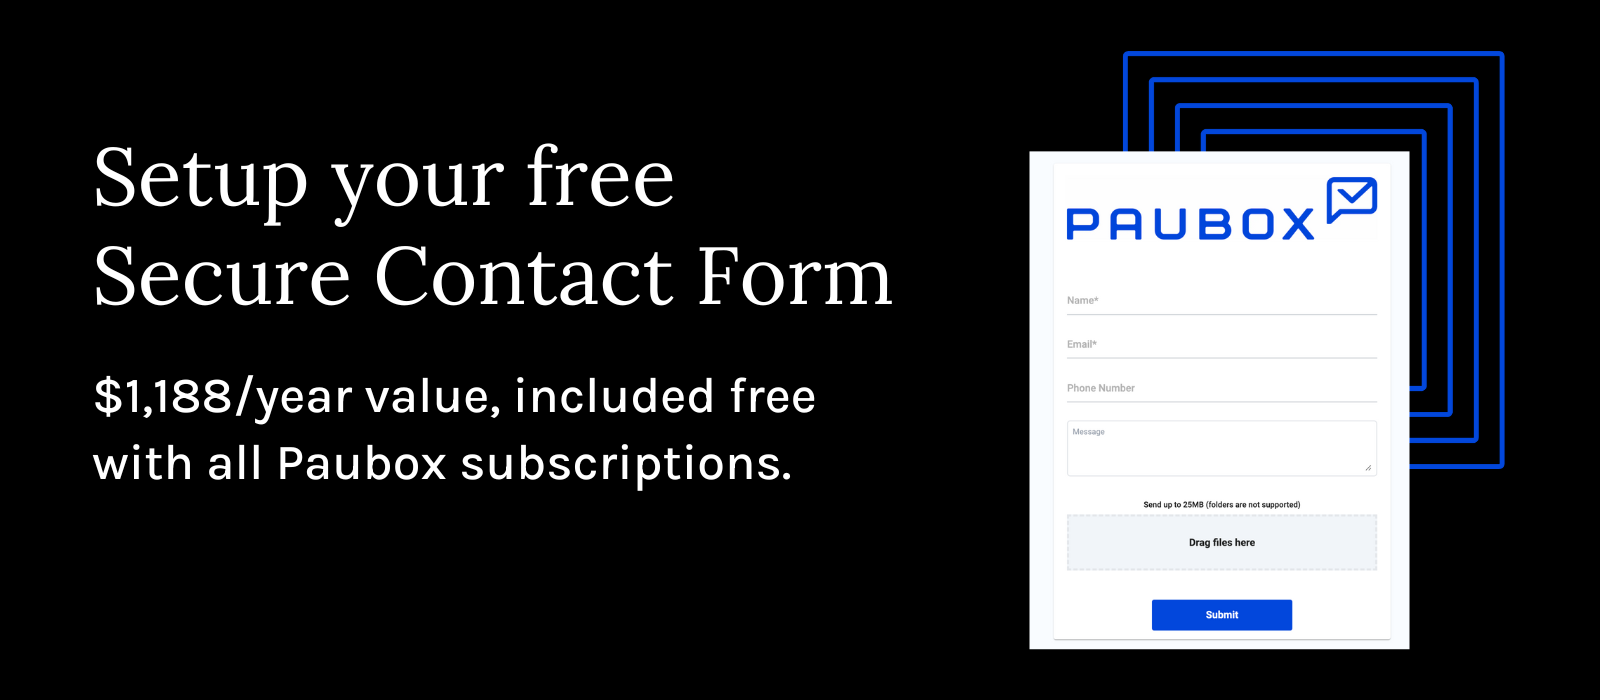 Setup your free Secure Contact Form